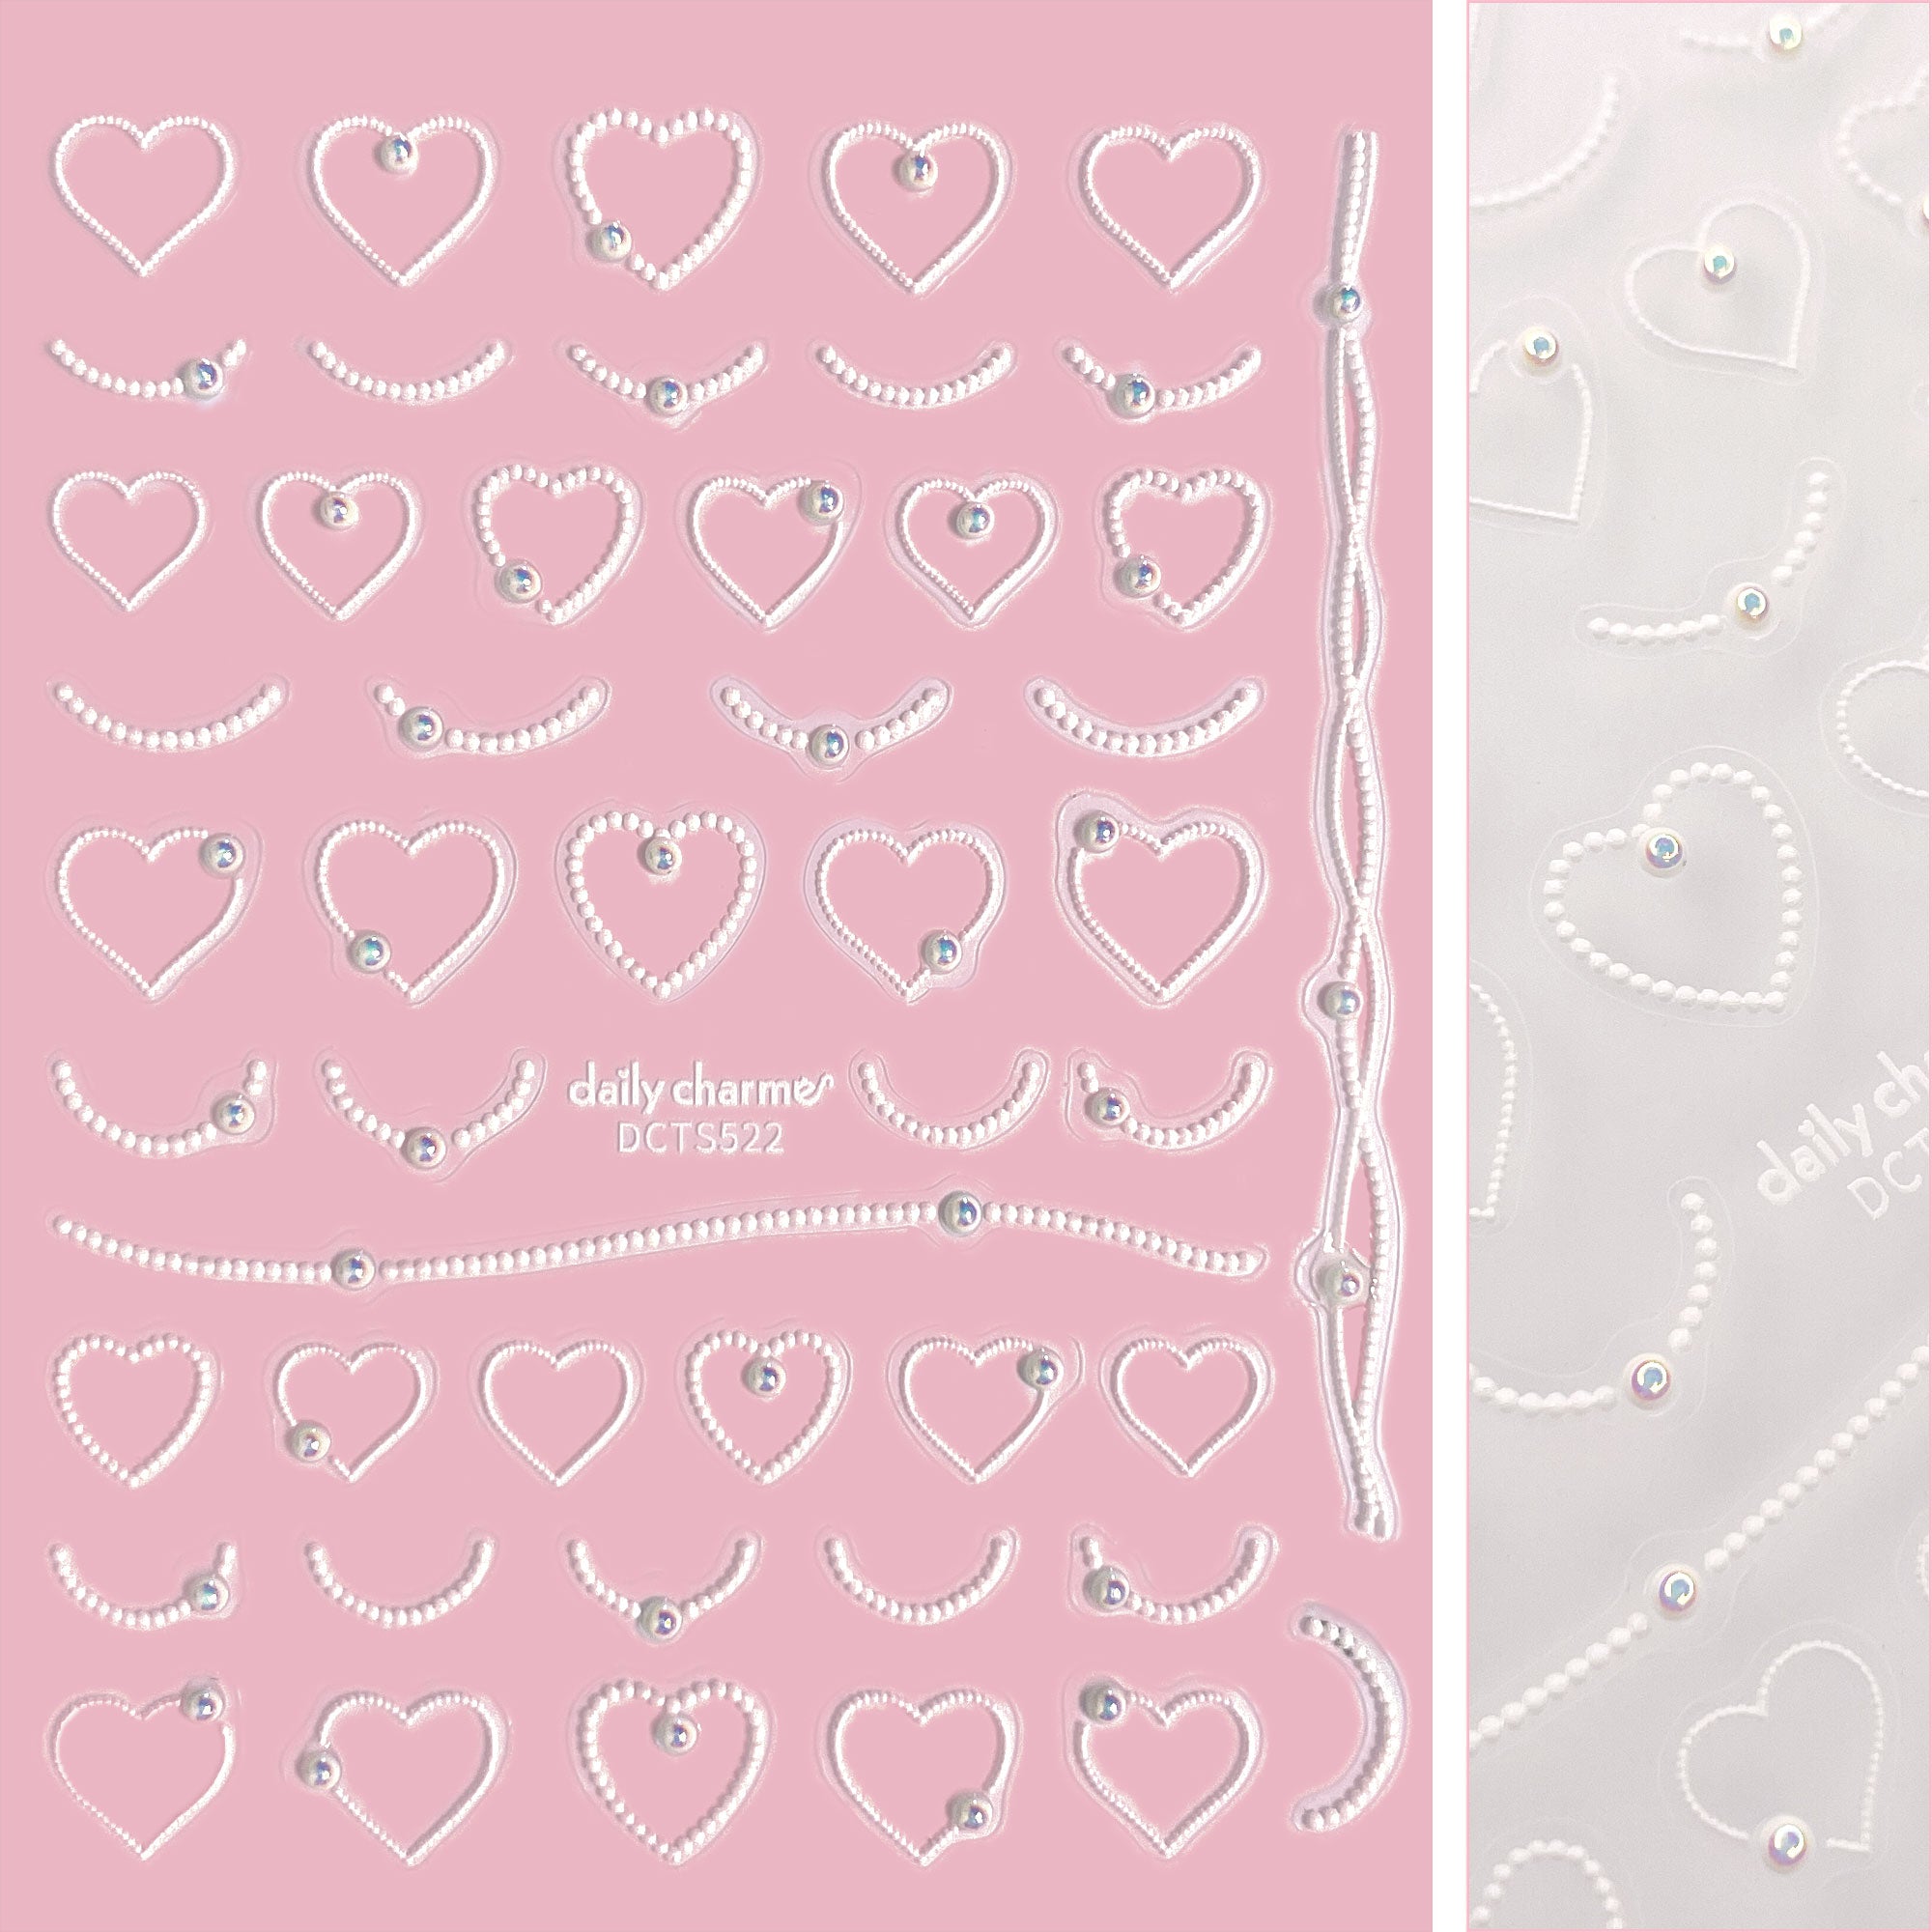 Bejeweled Nail Art Sticker / Pearly Dotted Hearts Coquette Nail Design Cute Valentine